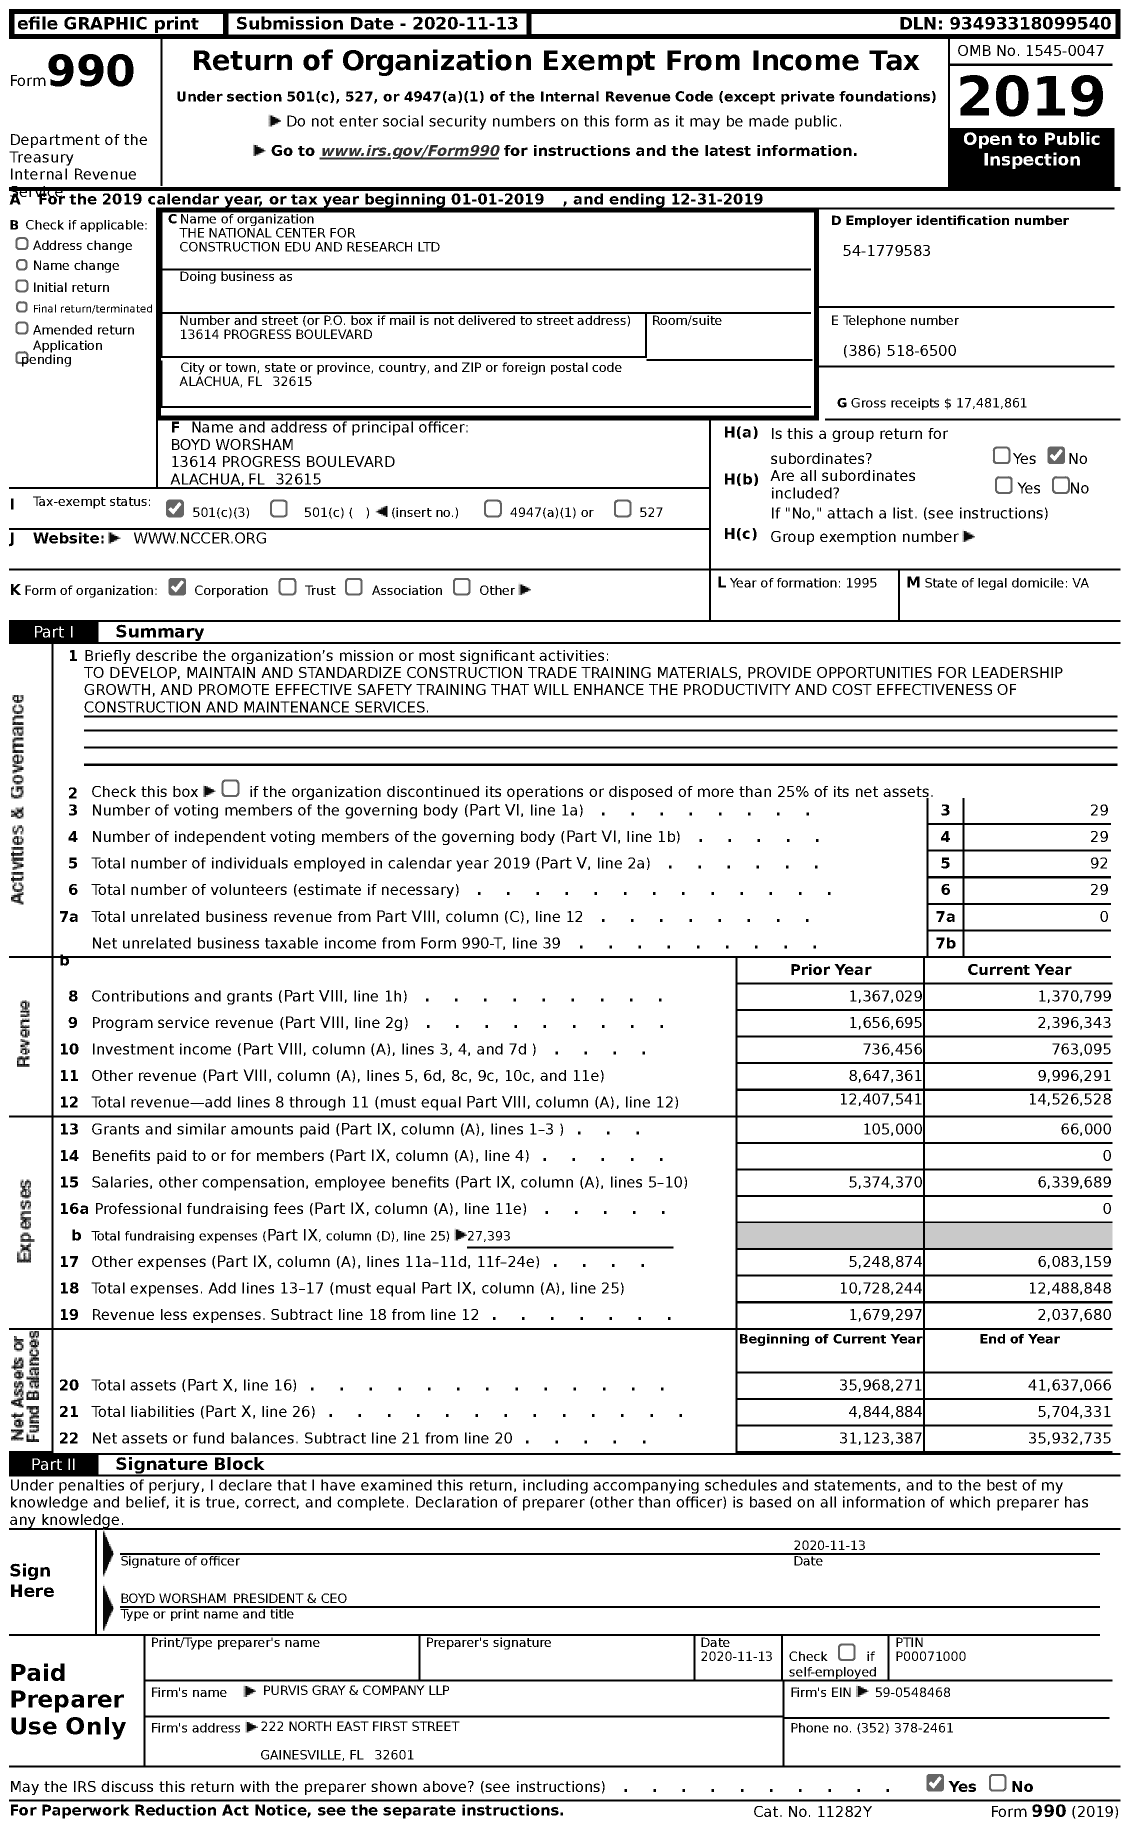 Image of first page of 2019 Form 990 for The National Center for Construction Edu and Research (NCCER)